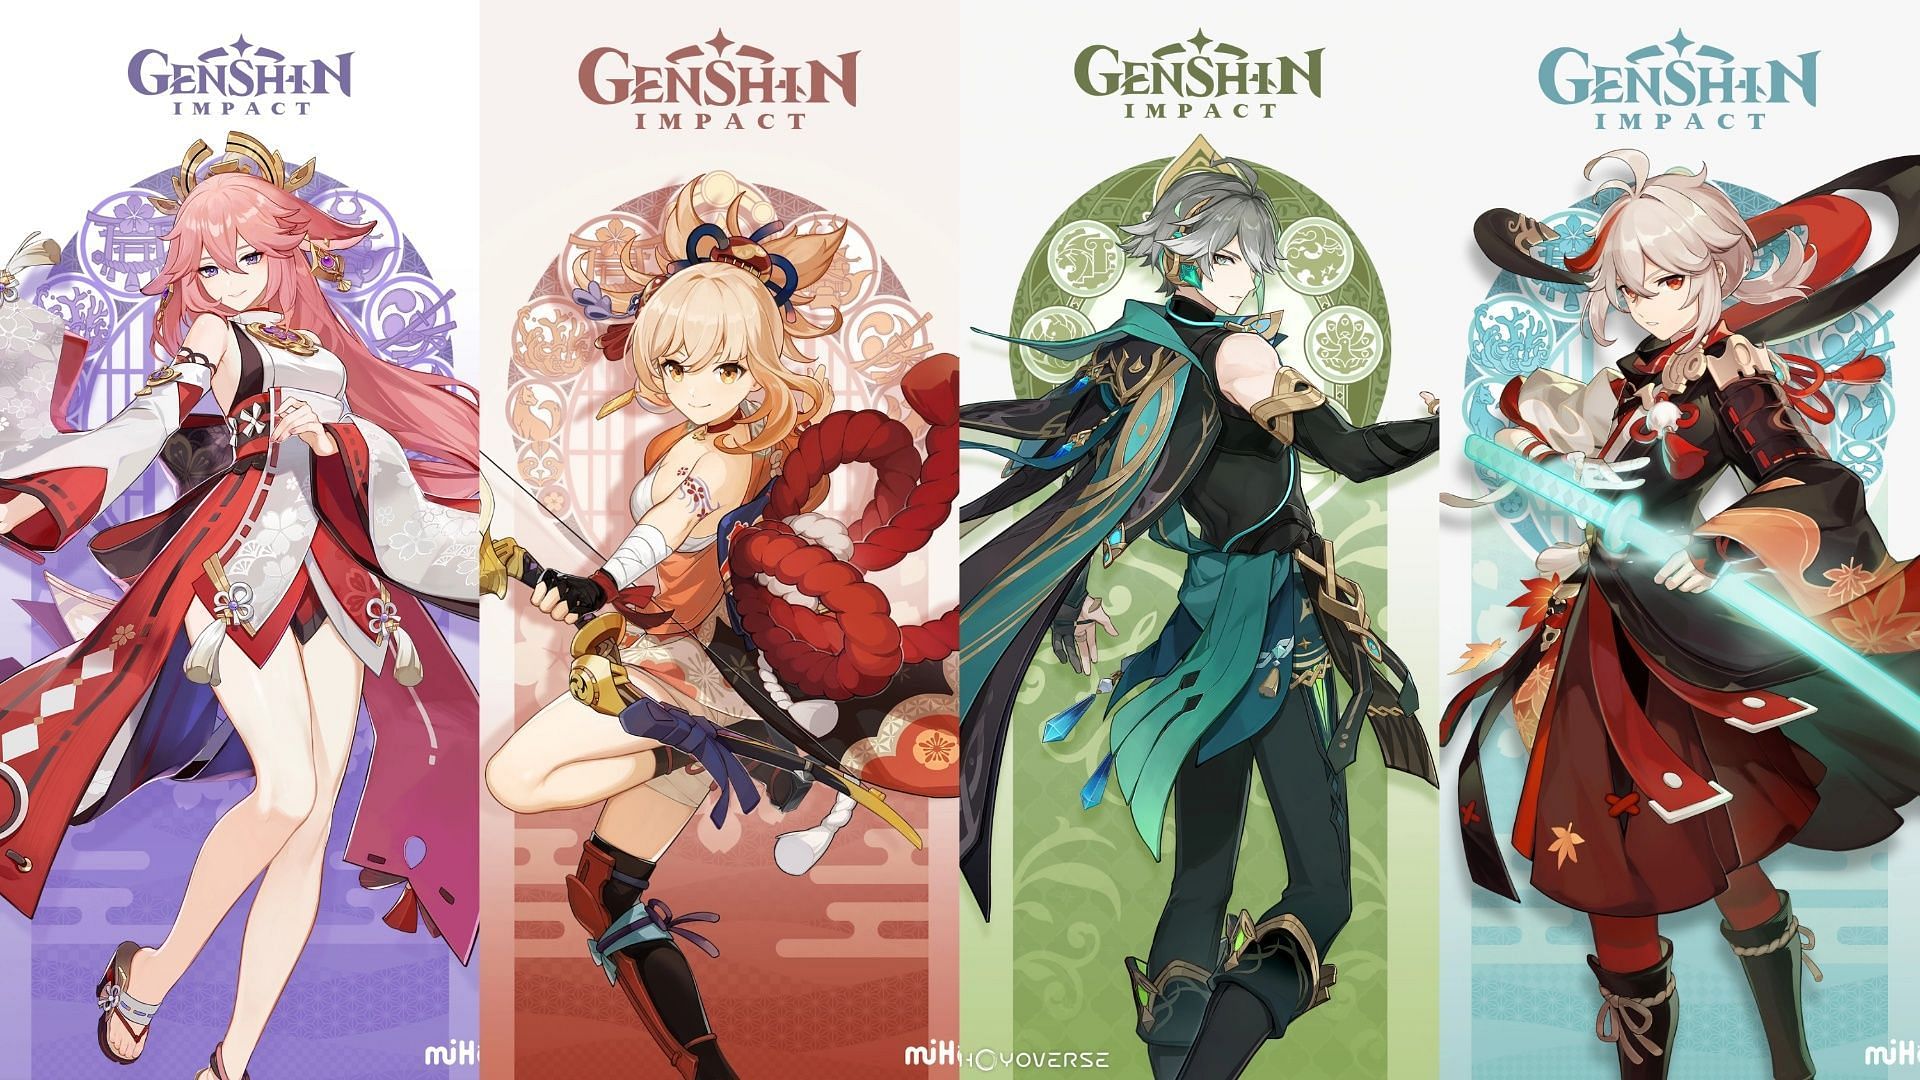 Genshin Impact 3.7 release date, new characters, and more